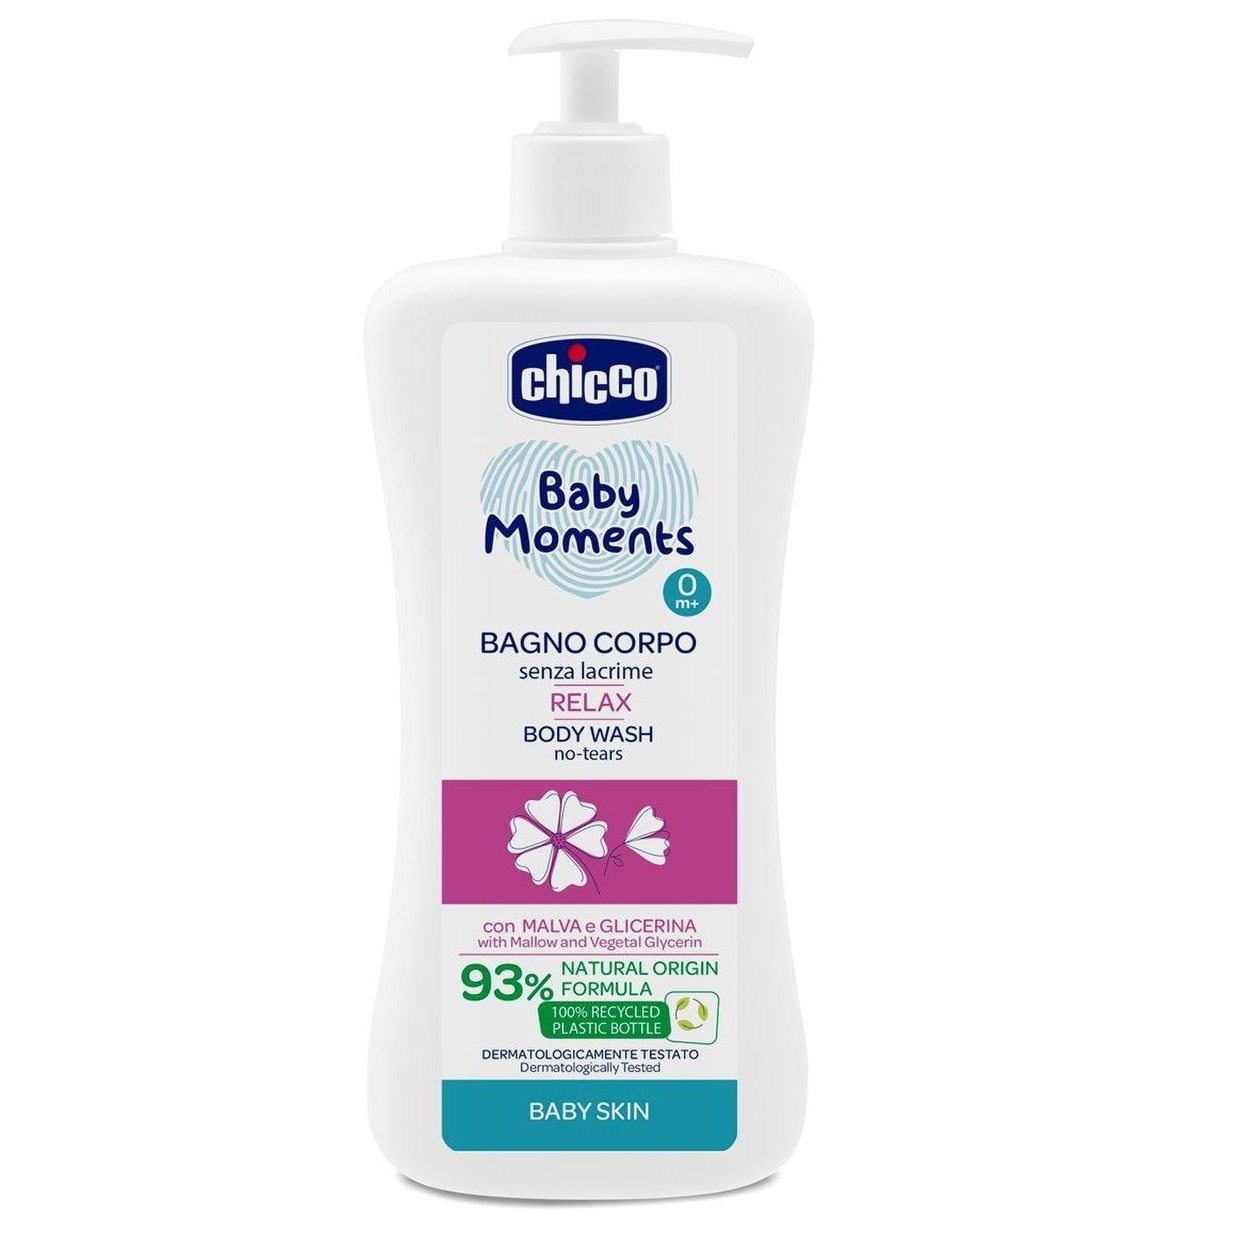 CHICCO BAGNO BABY MOMENTS 500ML. S/LACRIME RELAX